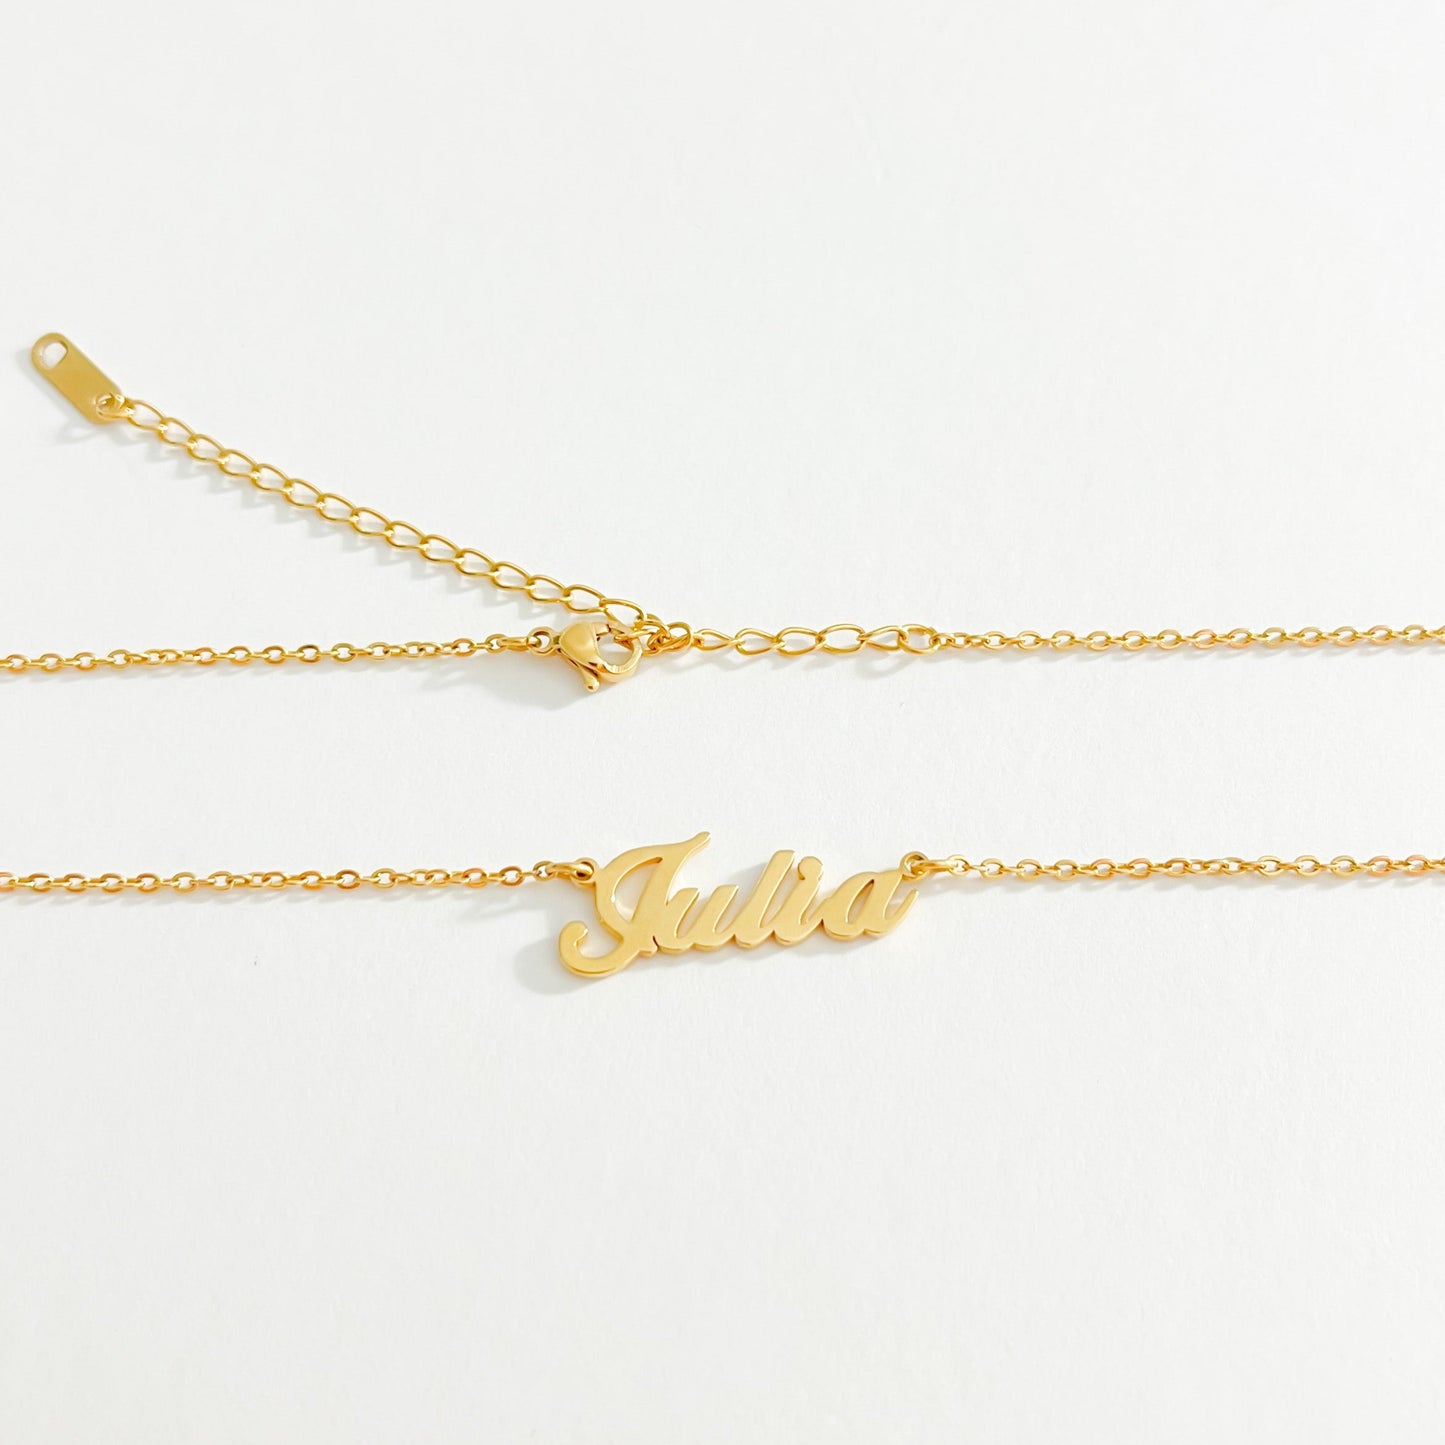 THE PERSONALISED NAME NECKLACE